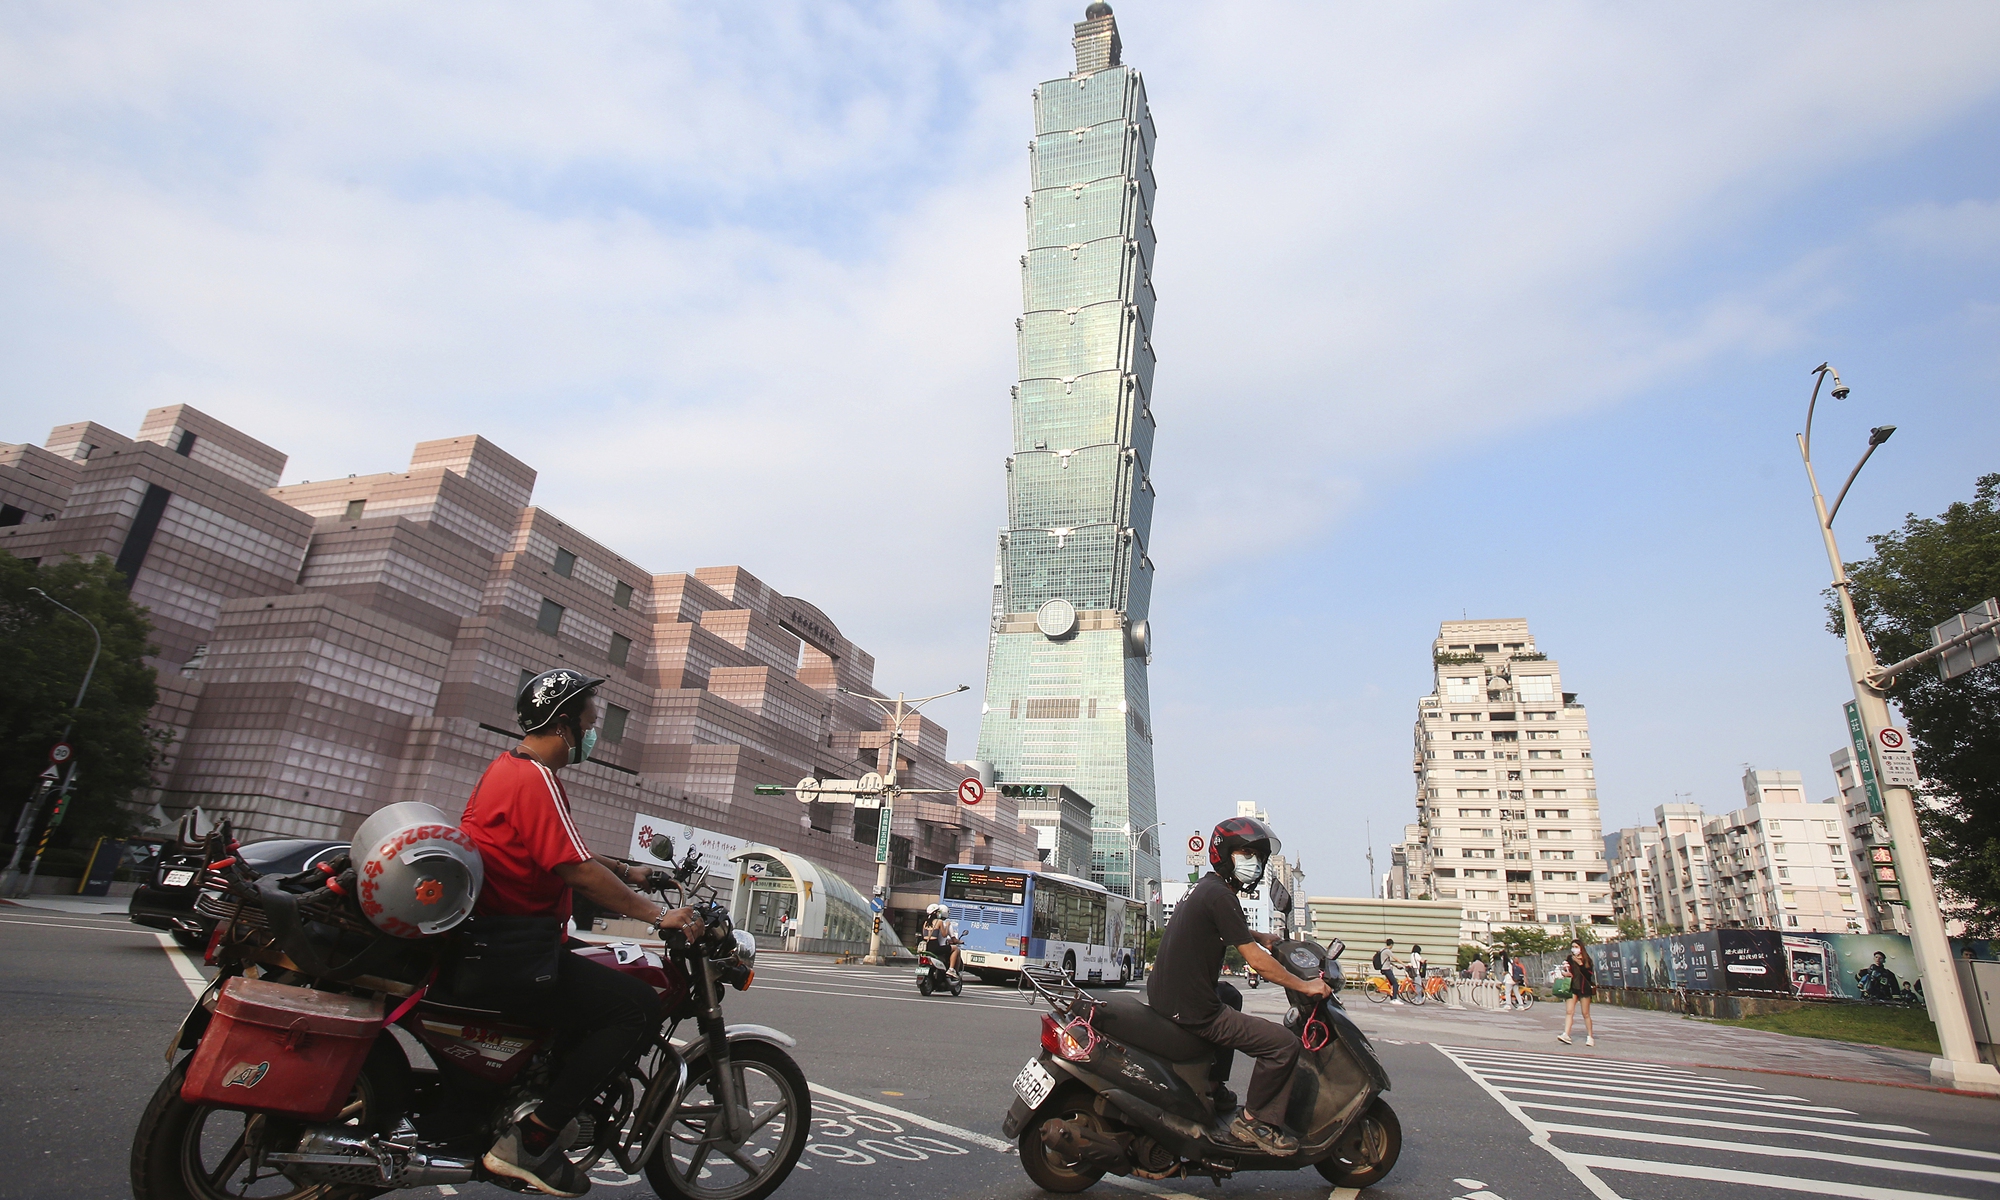 People wear face masks to protect against the spread of the coronavirus as they ride past the Taipei 101 building after the COVID-19 alert was raised to level 3 in Taipei, the island of Taiwan on May 15, 2021. Photo: VCG